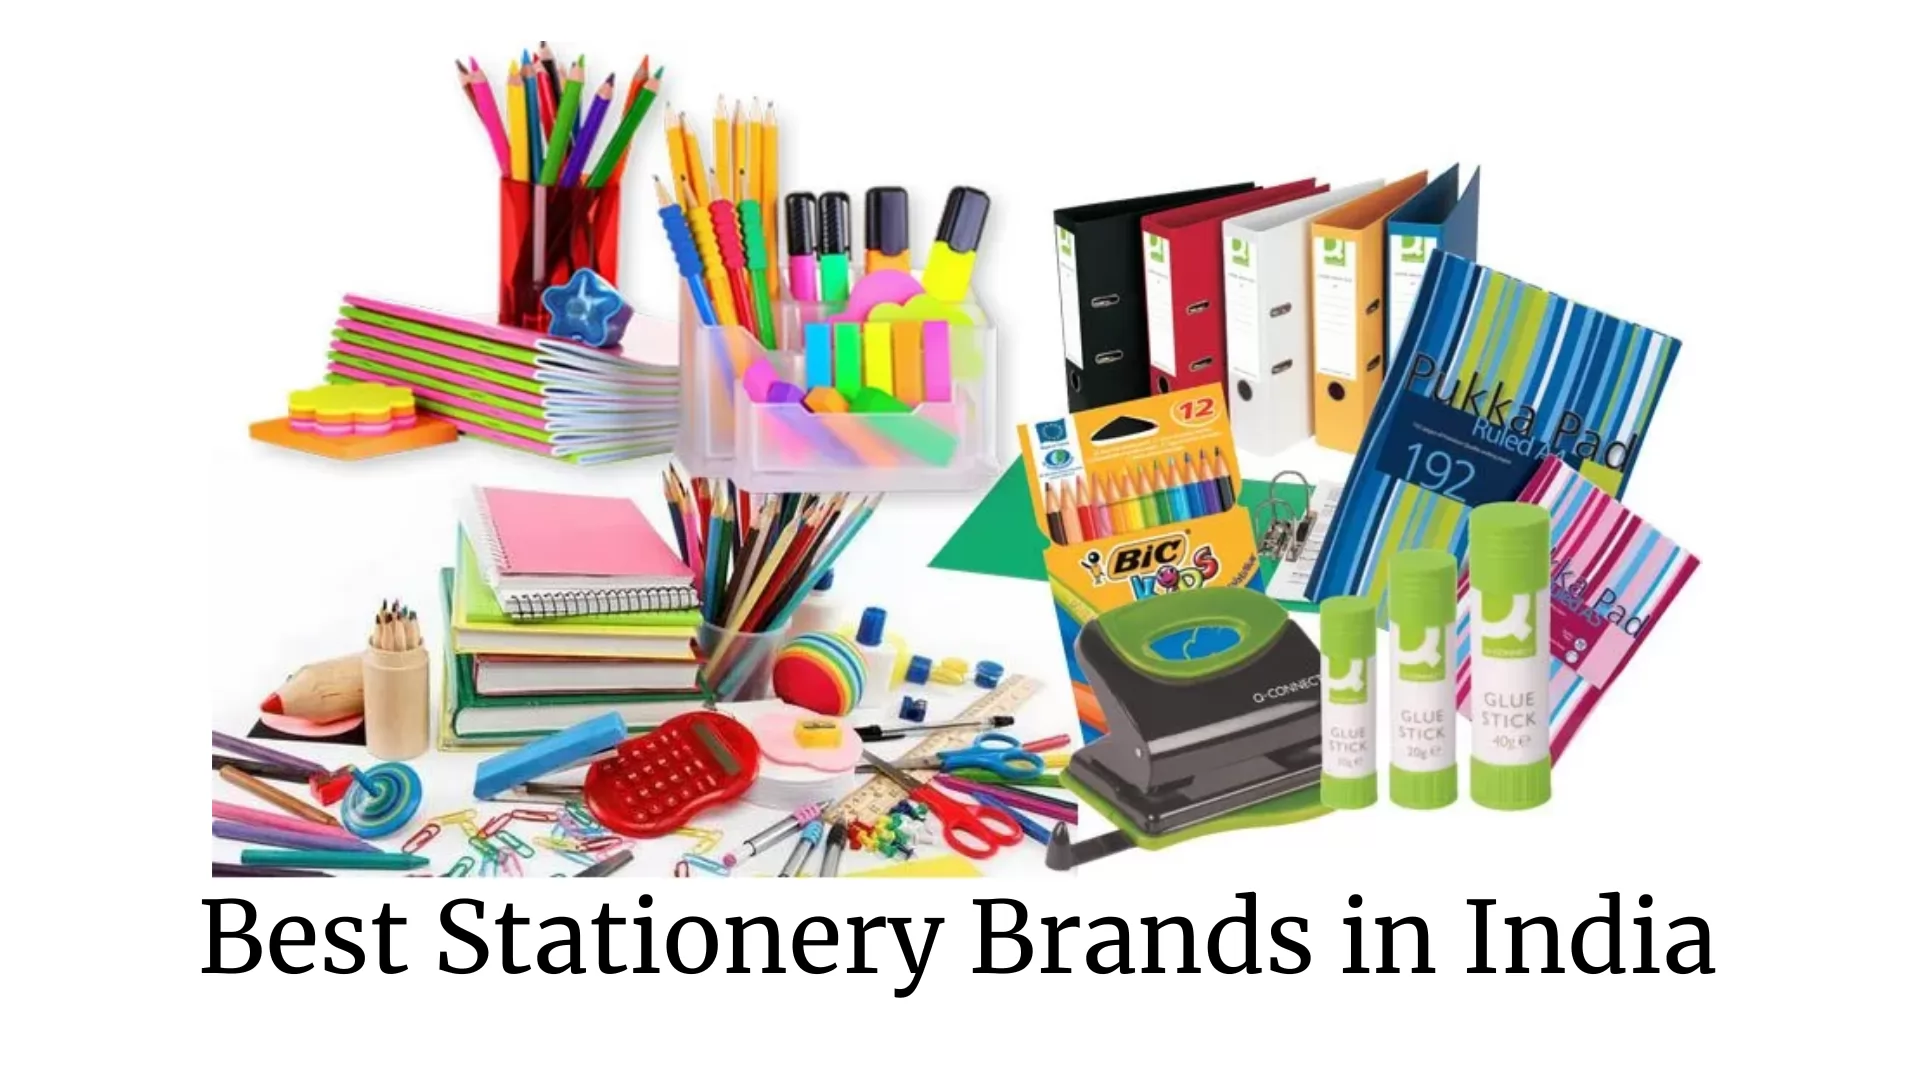 Best Stationery Brands in India